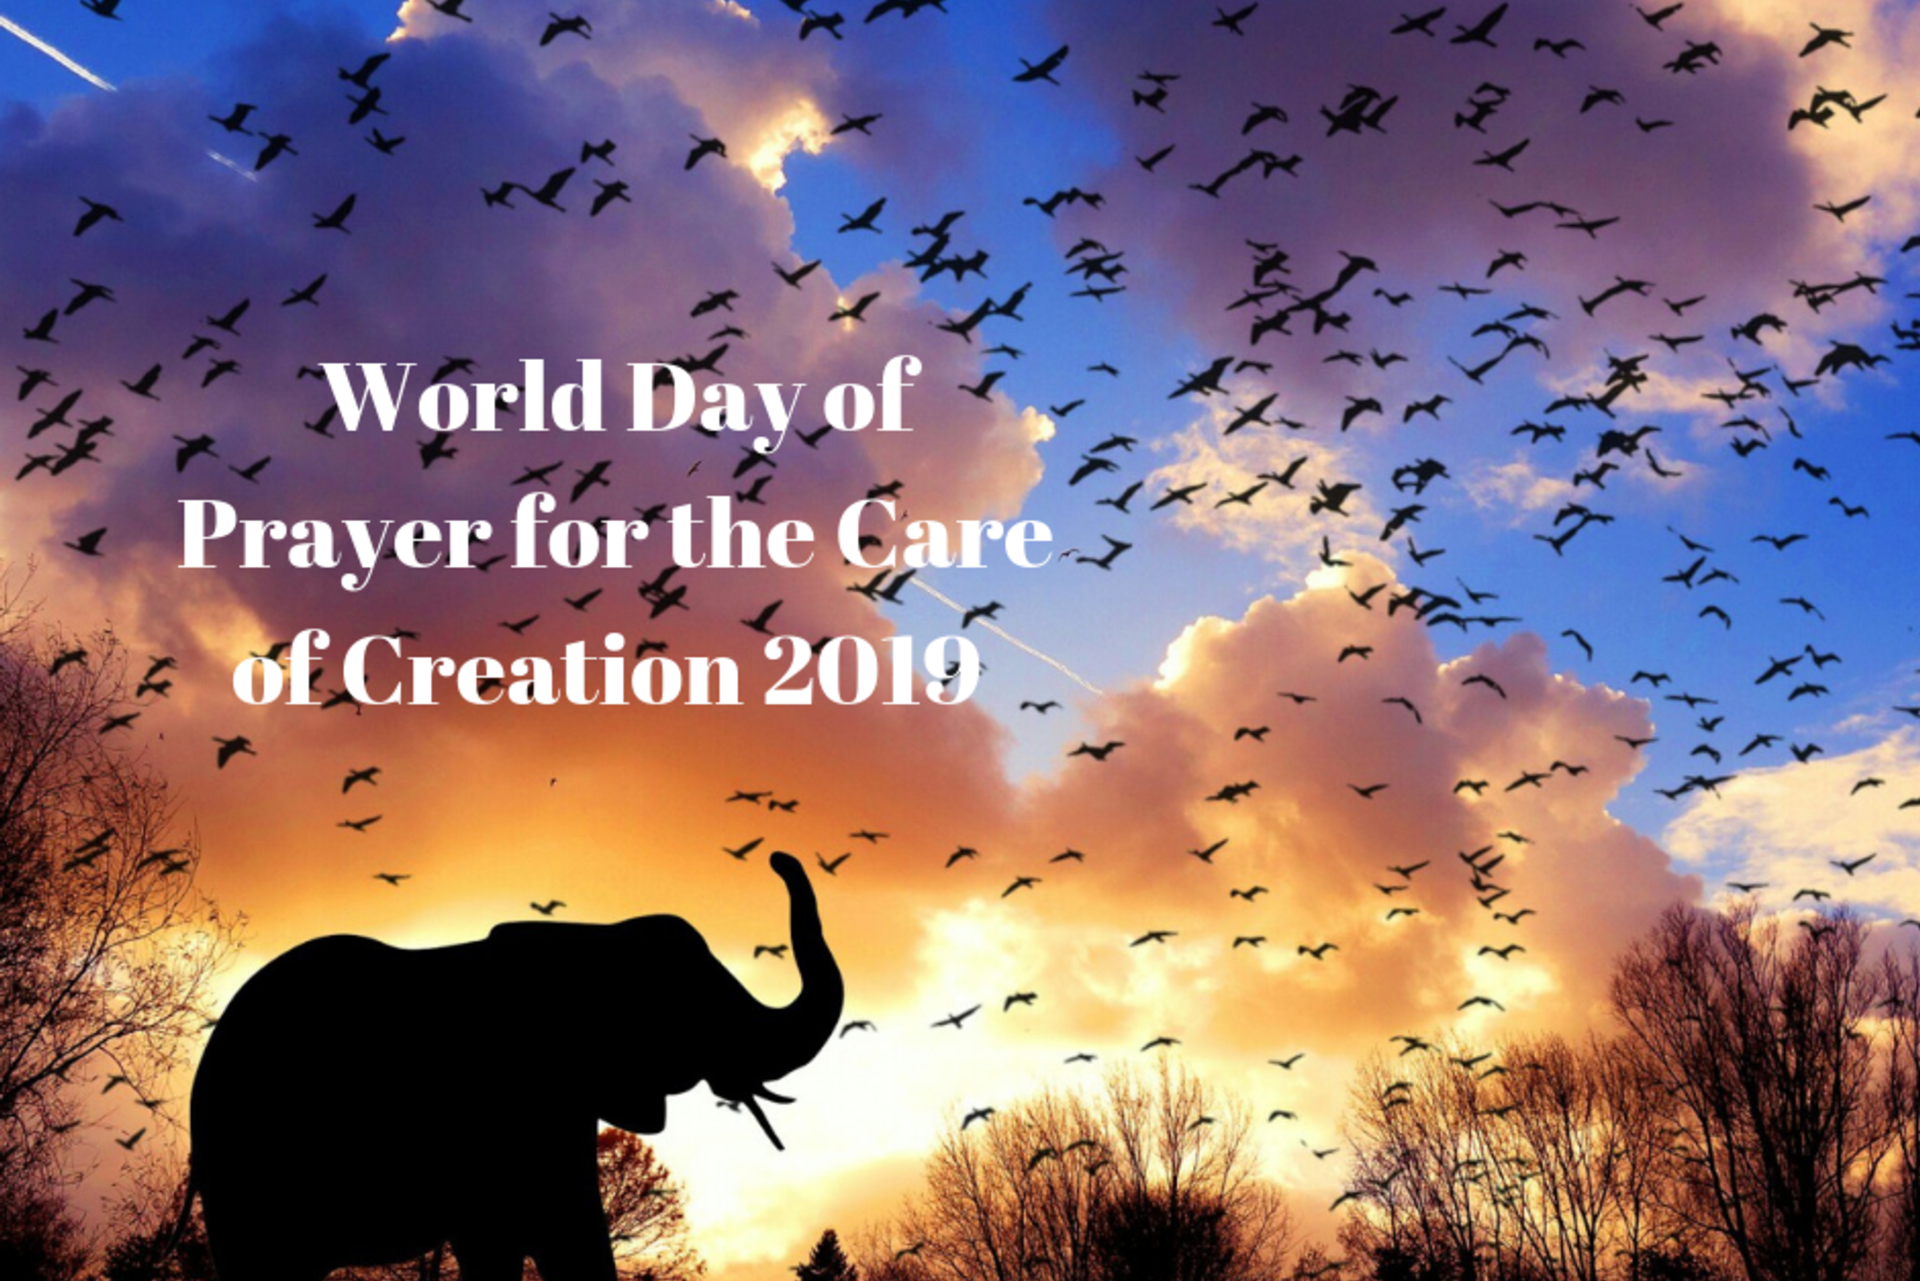 Pope's message for the World Day of Prayer for the Care of Creation 2019